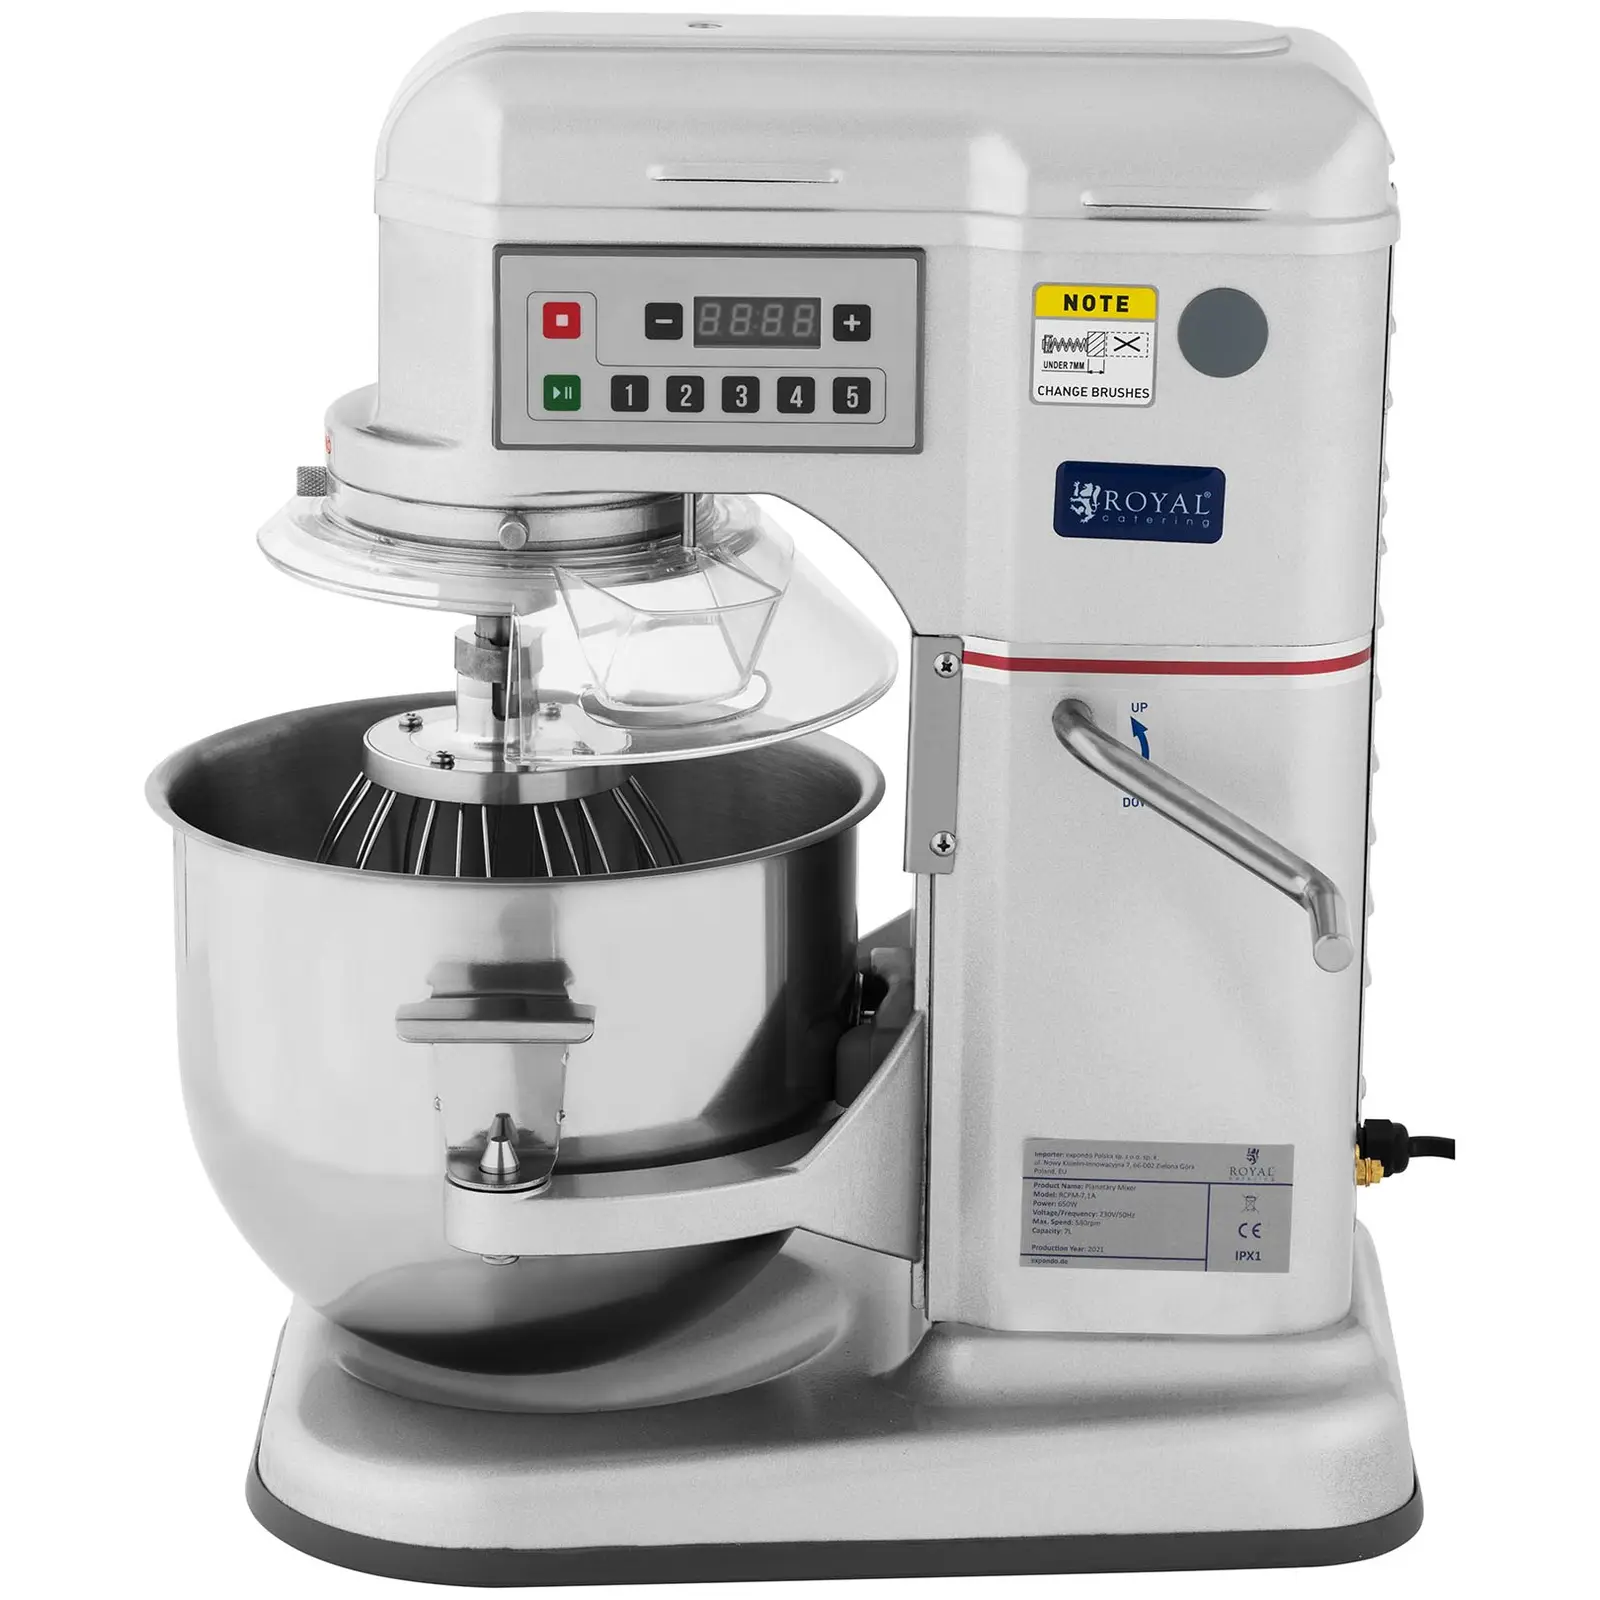 Amasadora - 650 W - Royal Catering - 230 - 580 rpm